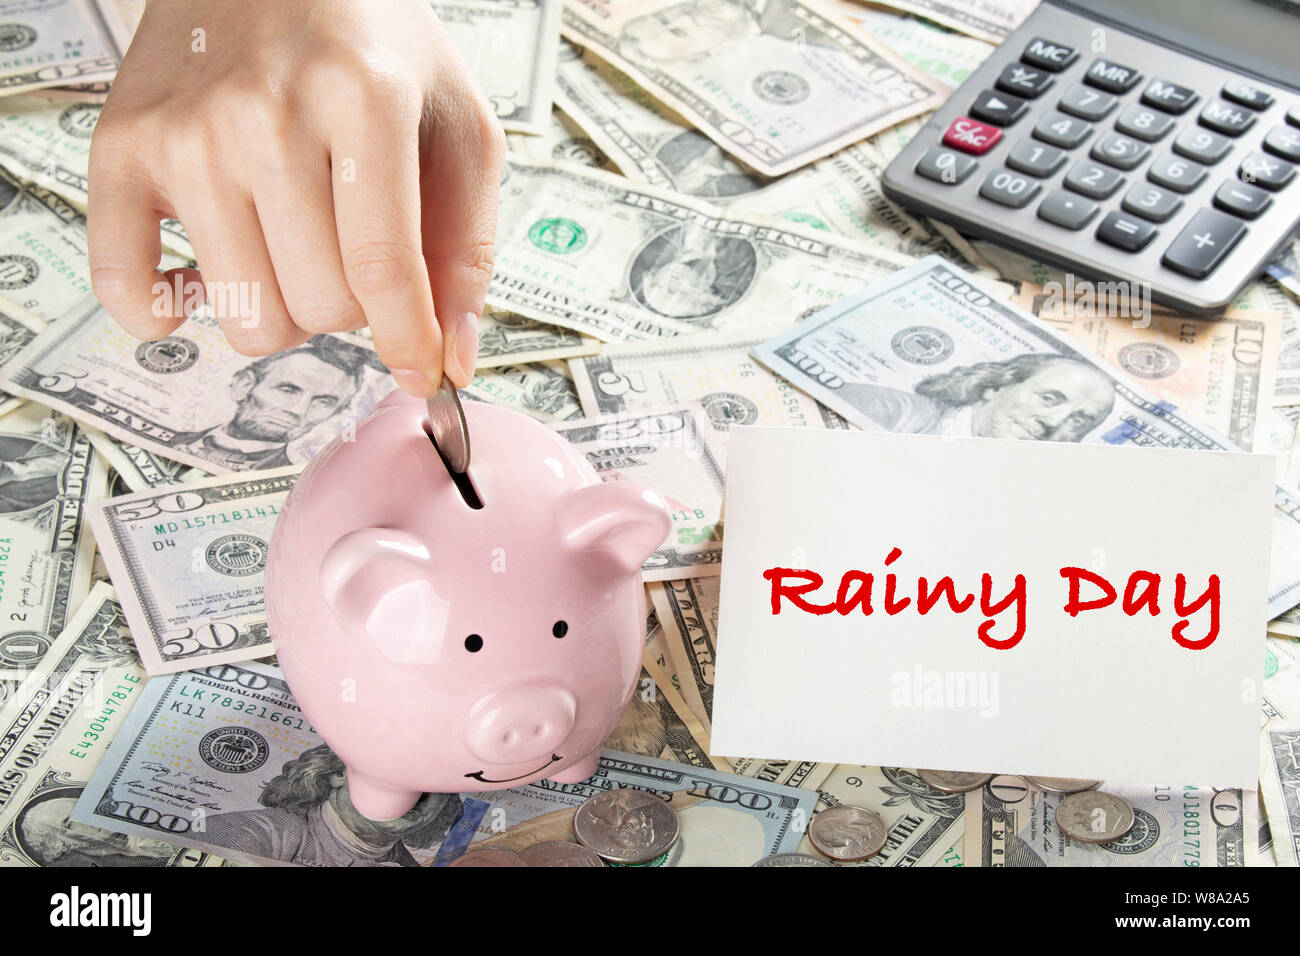 United States bank notes and coins with a calcultor, piggy bank, and hand placing coin into piggy bank and a card that says Rainy Day Stock Photo